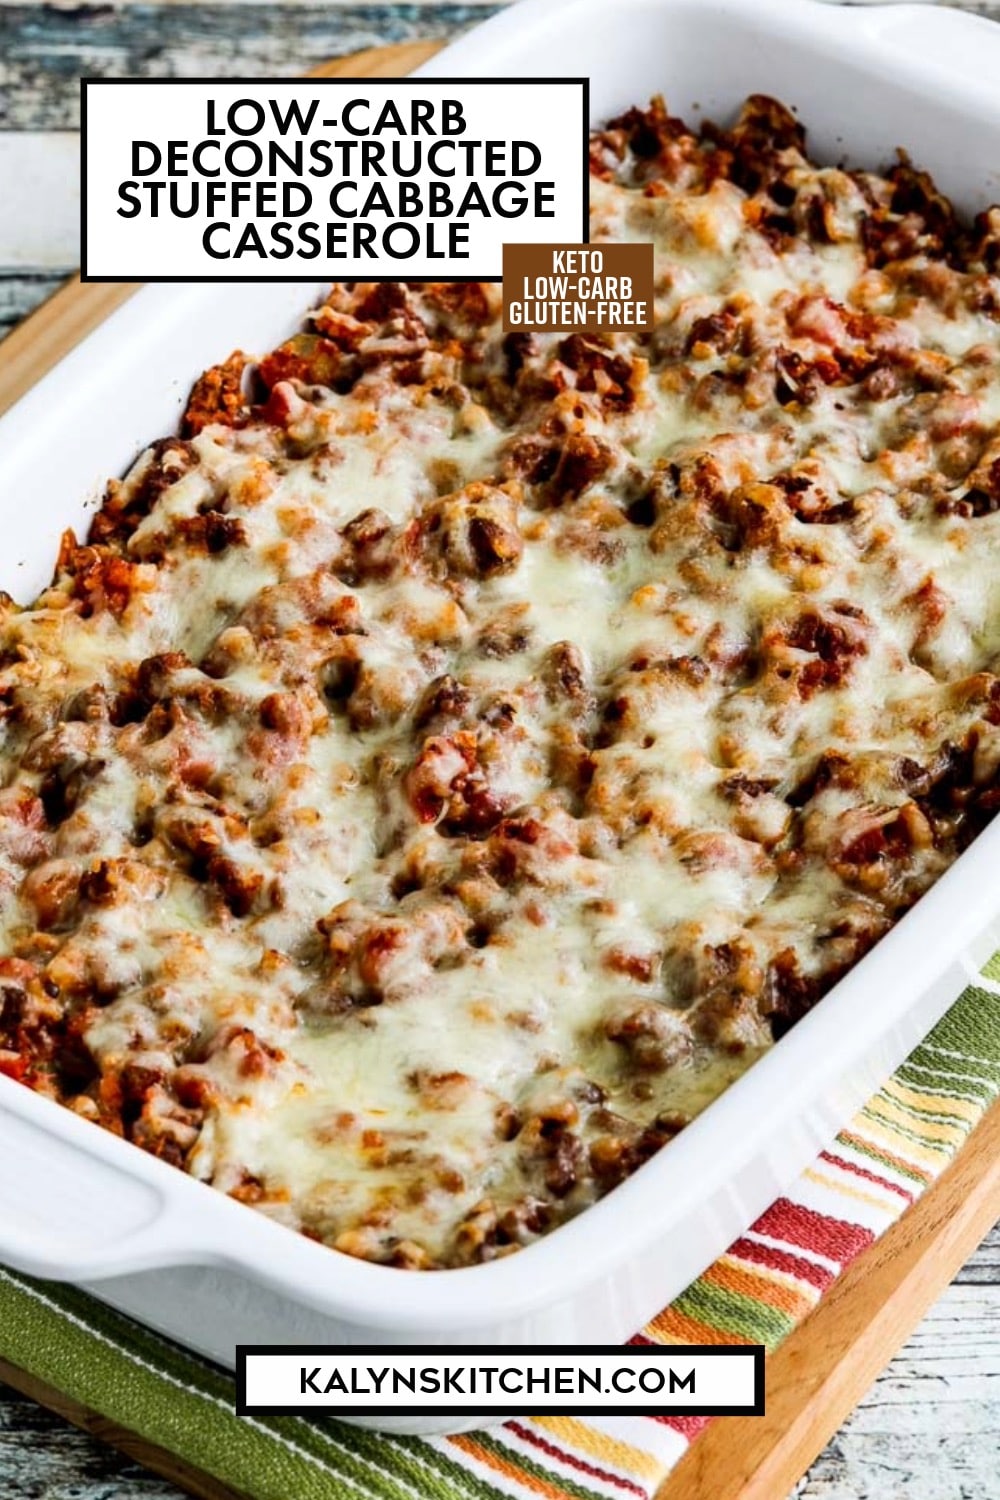 Pinterest image of Low-Carb Deconstructed Stuffed Cabbage Casserole